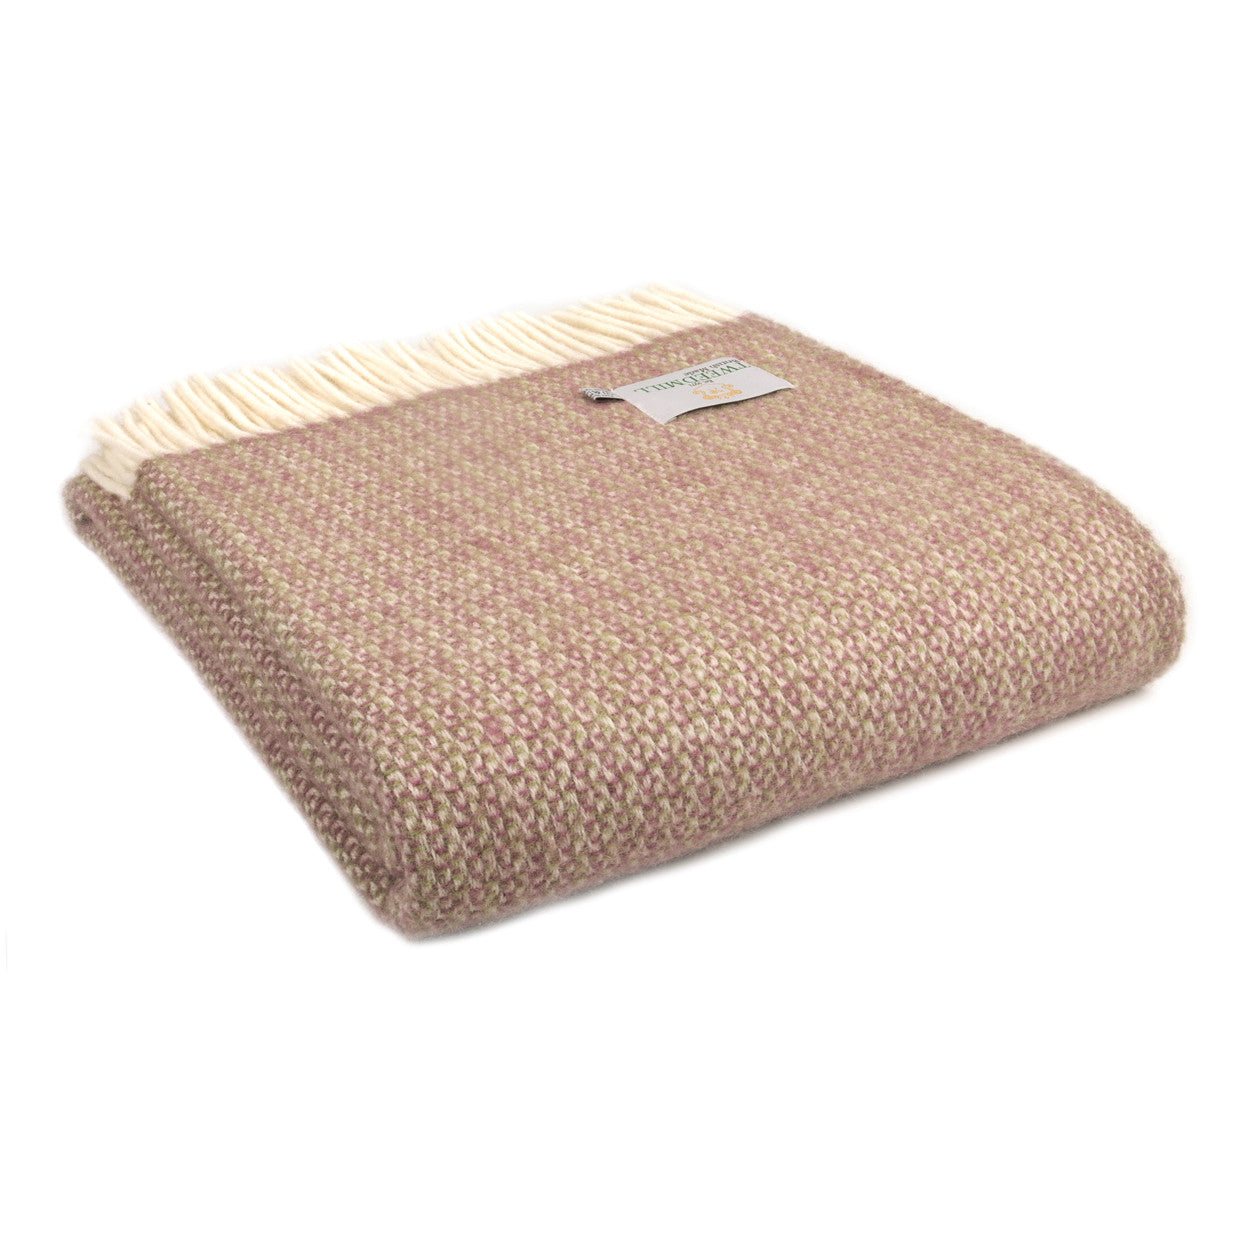 Illusion Knee Blankets - Pure New Wool Made in the UK by Tweedmill